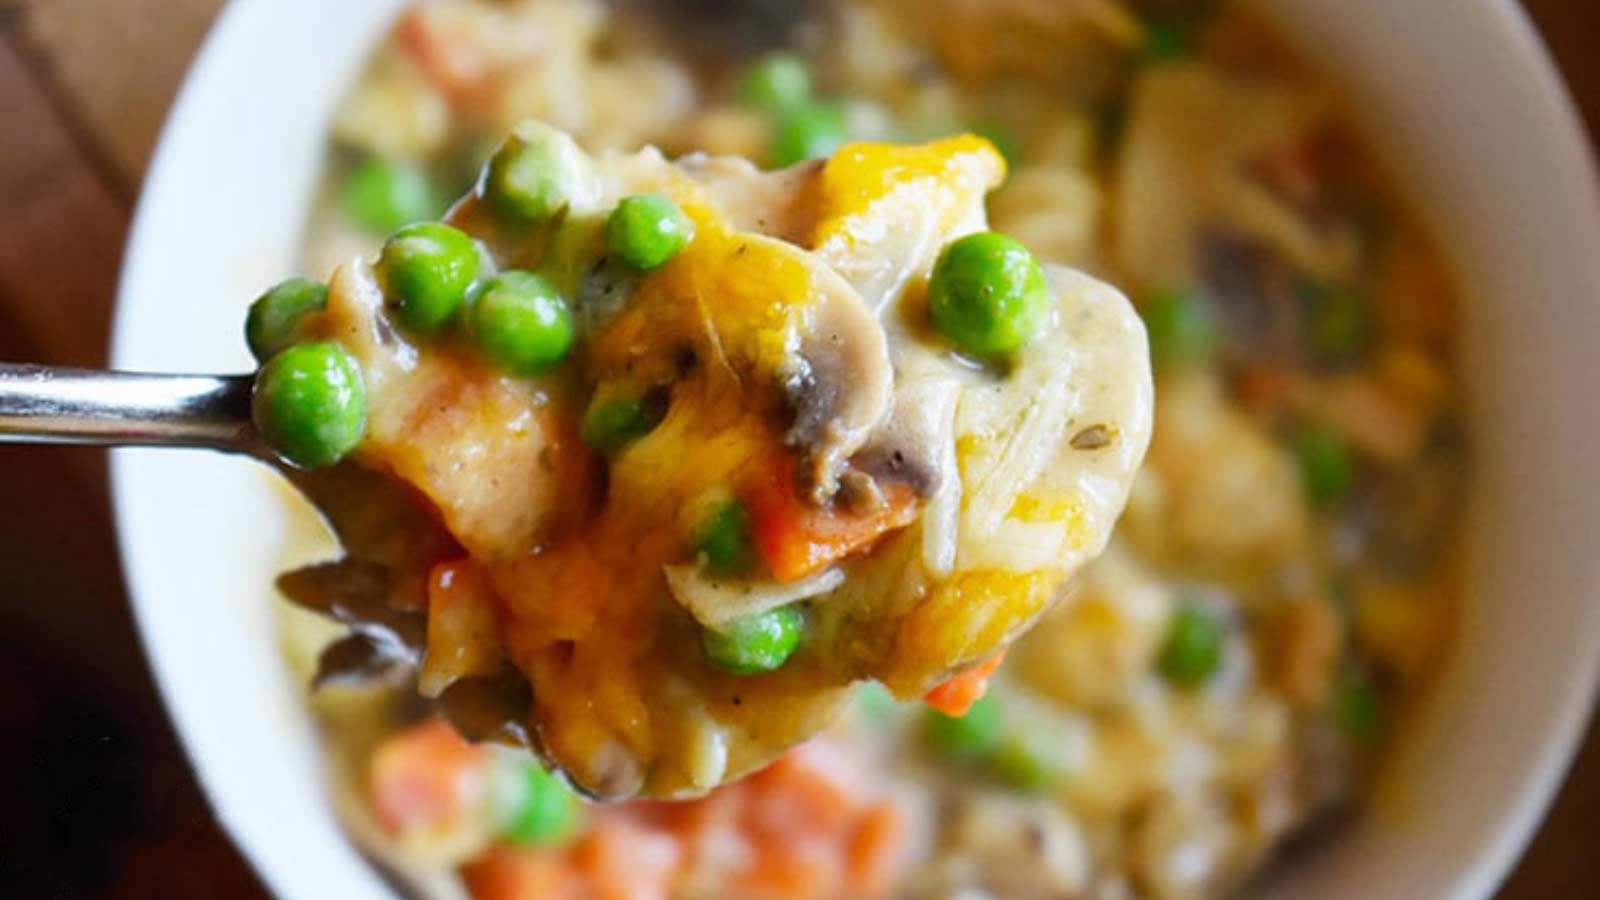 15 Dinner Recipes Without Any Processed Sugar